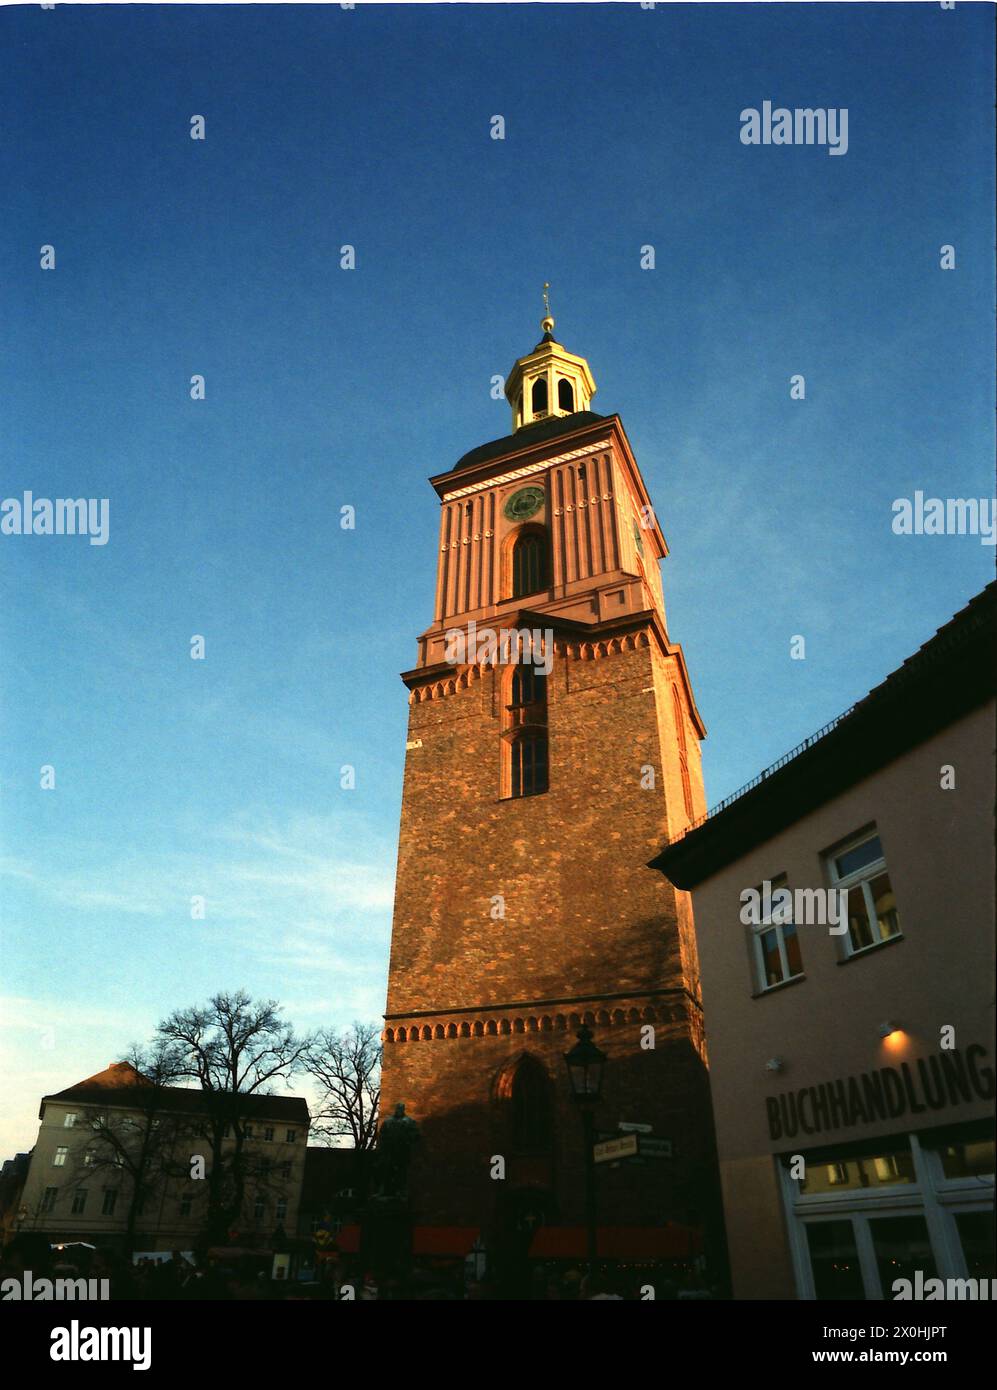 A visit to the Spandau Christmas market is always worthwhile. Don't forget to take a look at the Nikolaikirche church pictured here [automated translation] Stock Photo